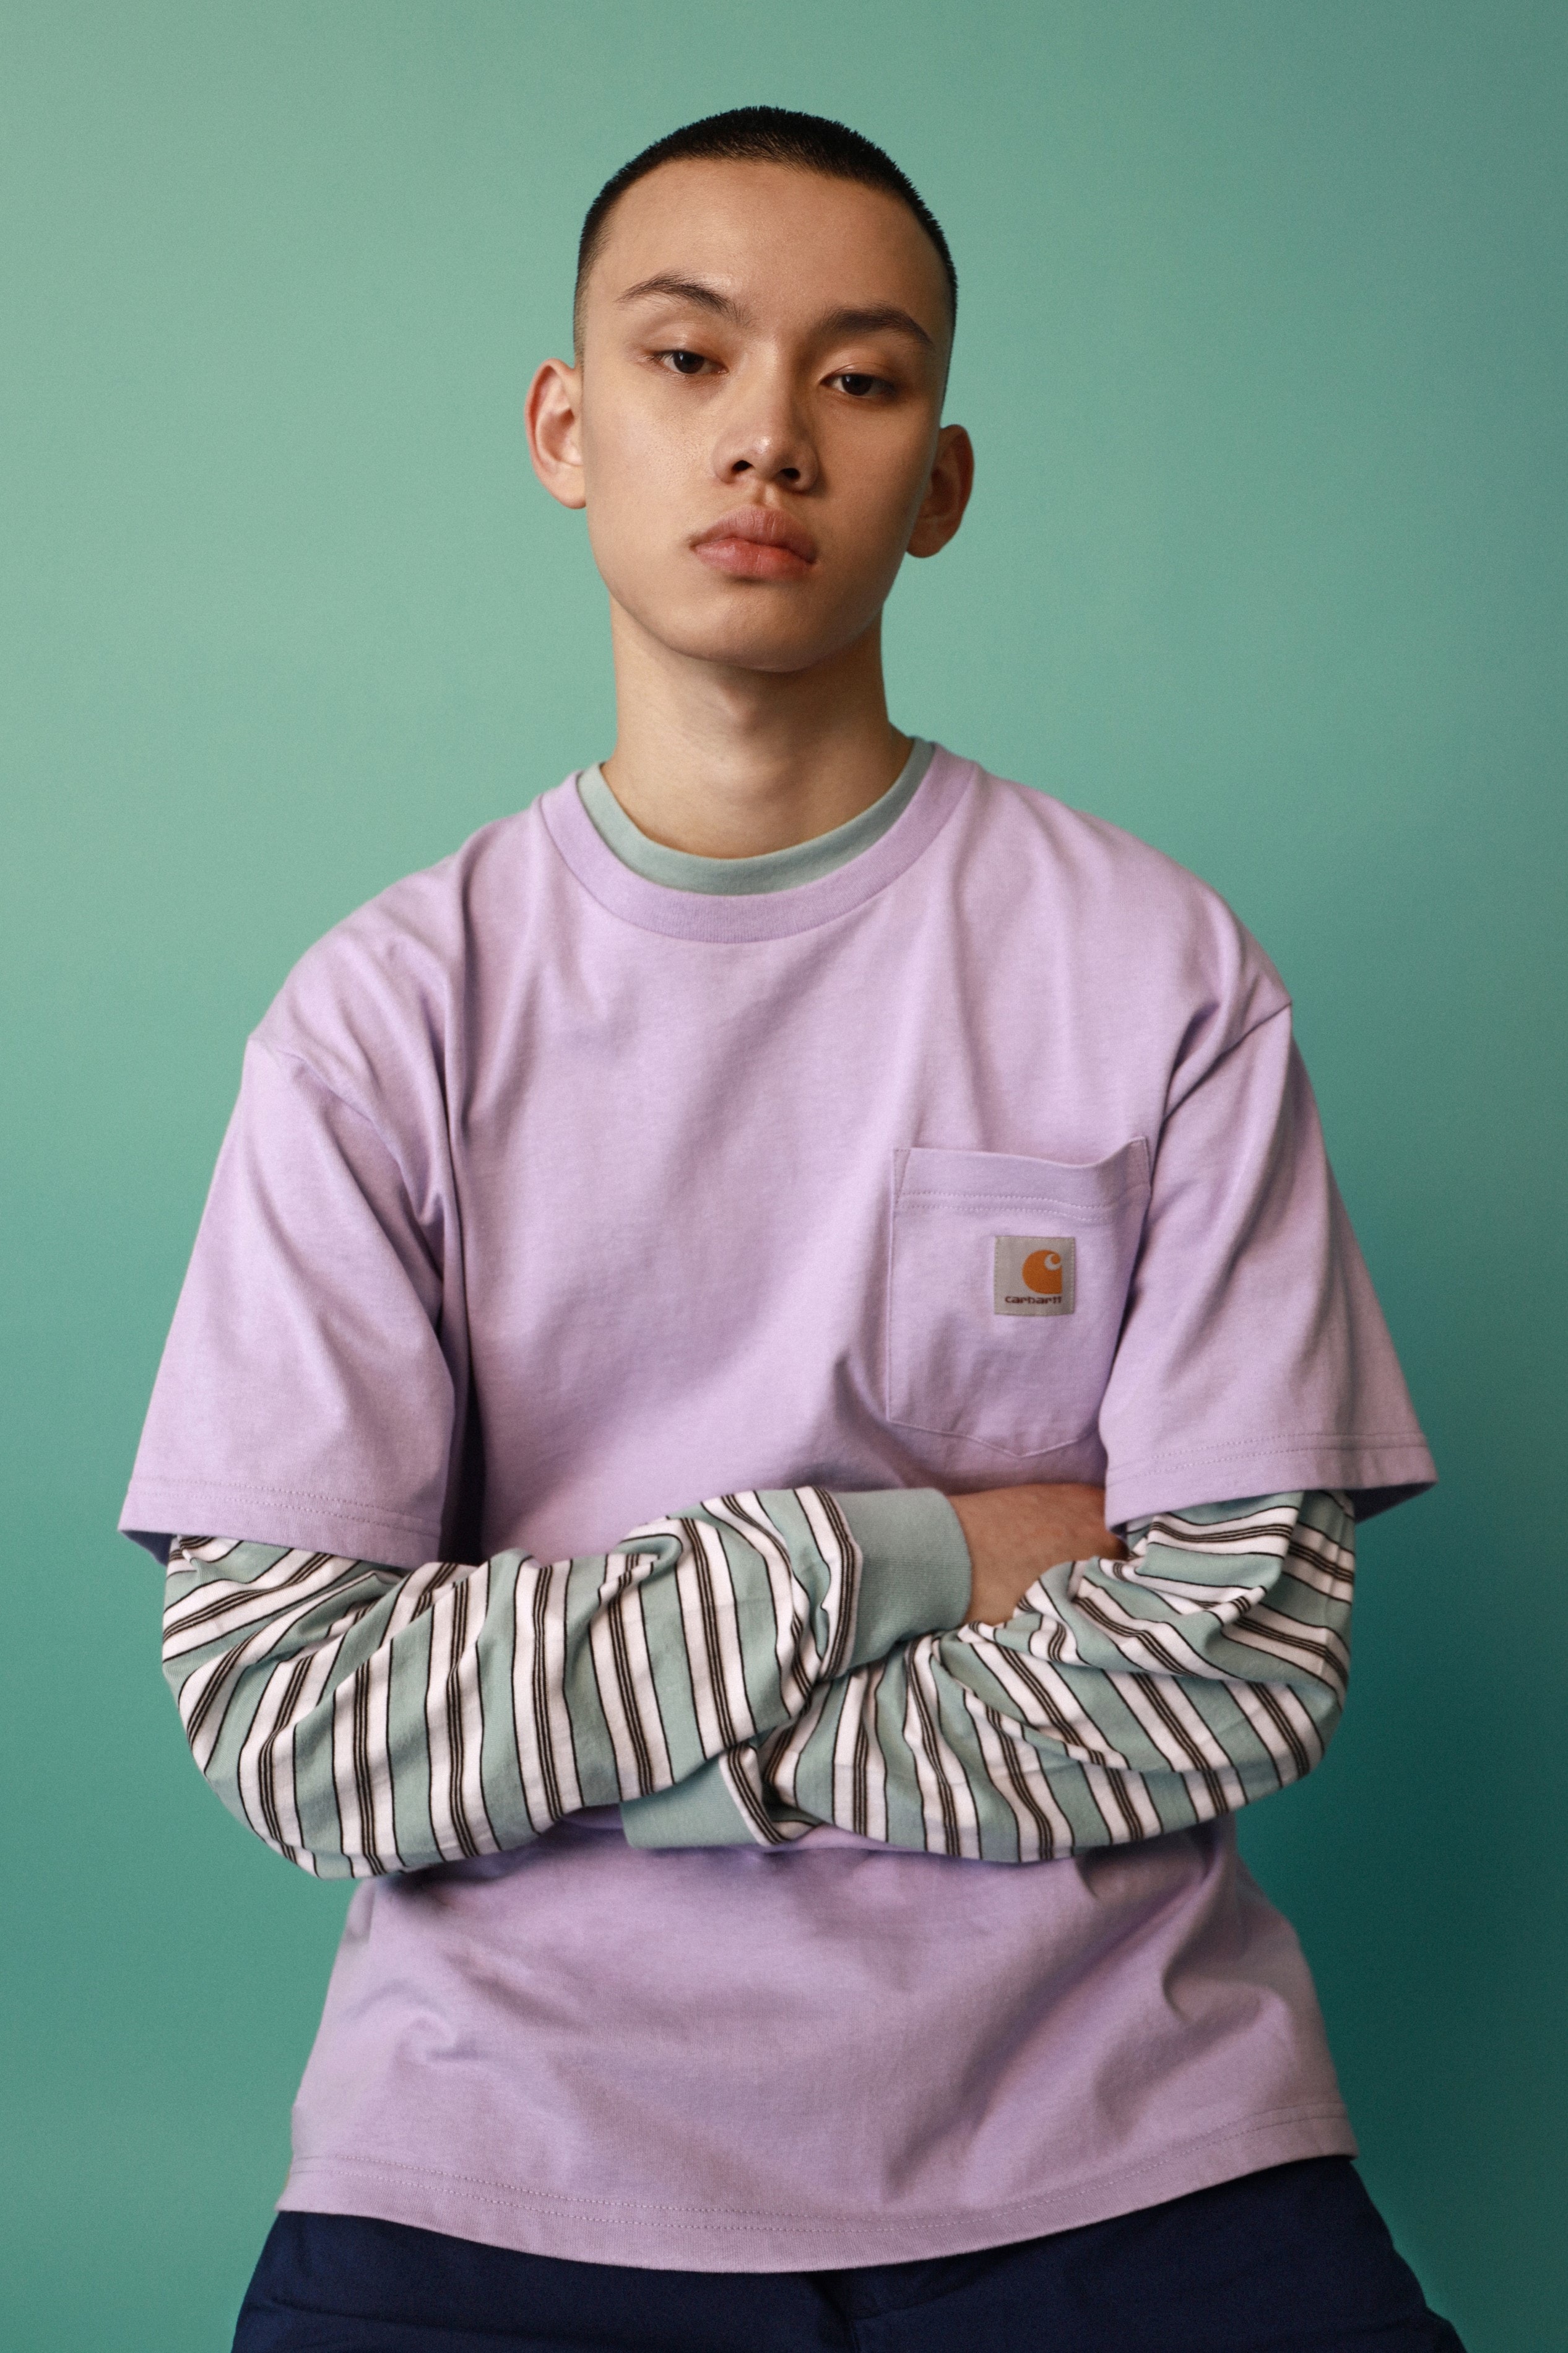 Carhartt WIP 最新 2019 春夏「Exclusive Capsule Collection」系列登場